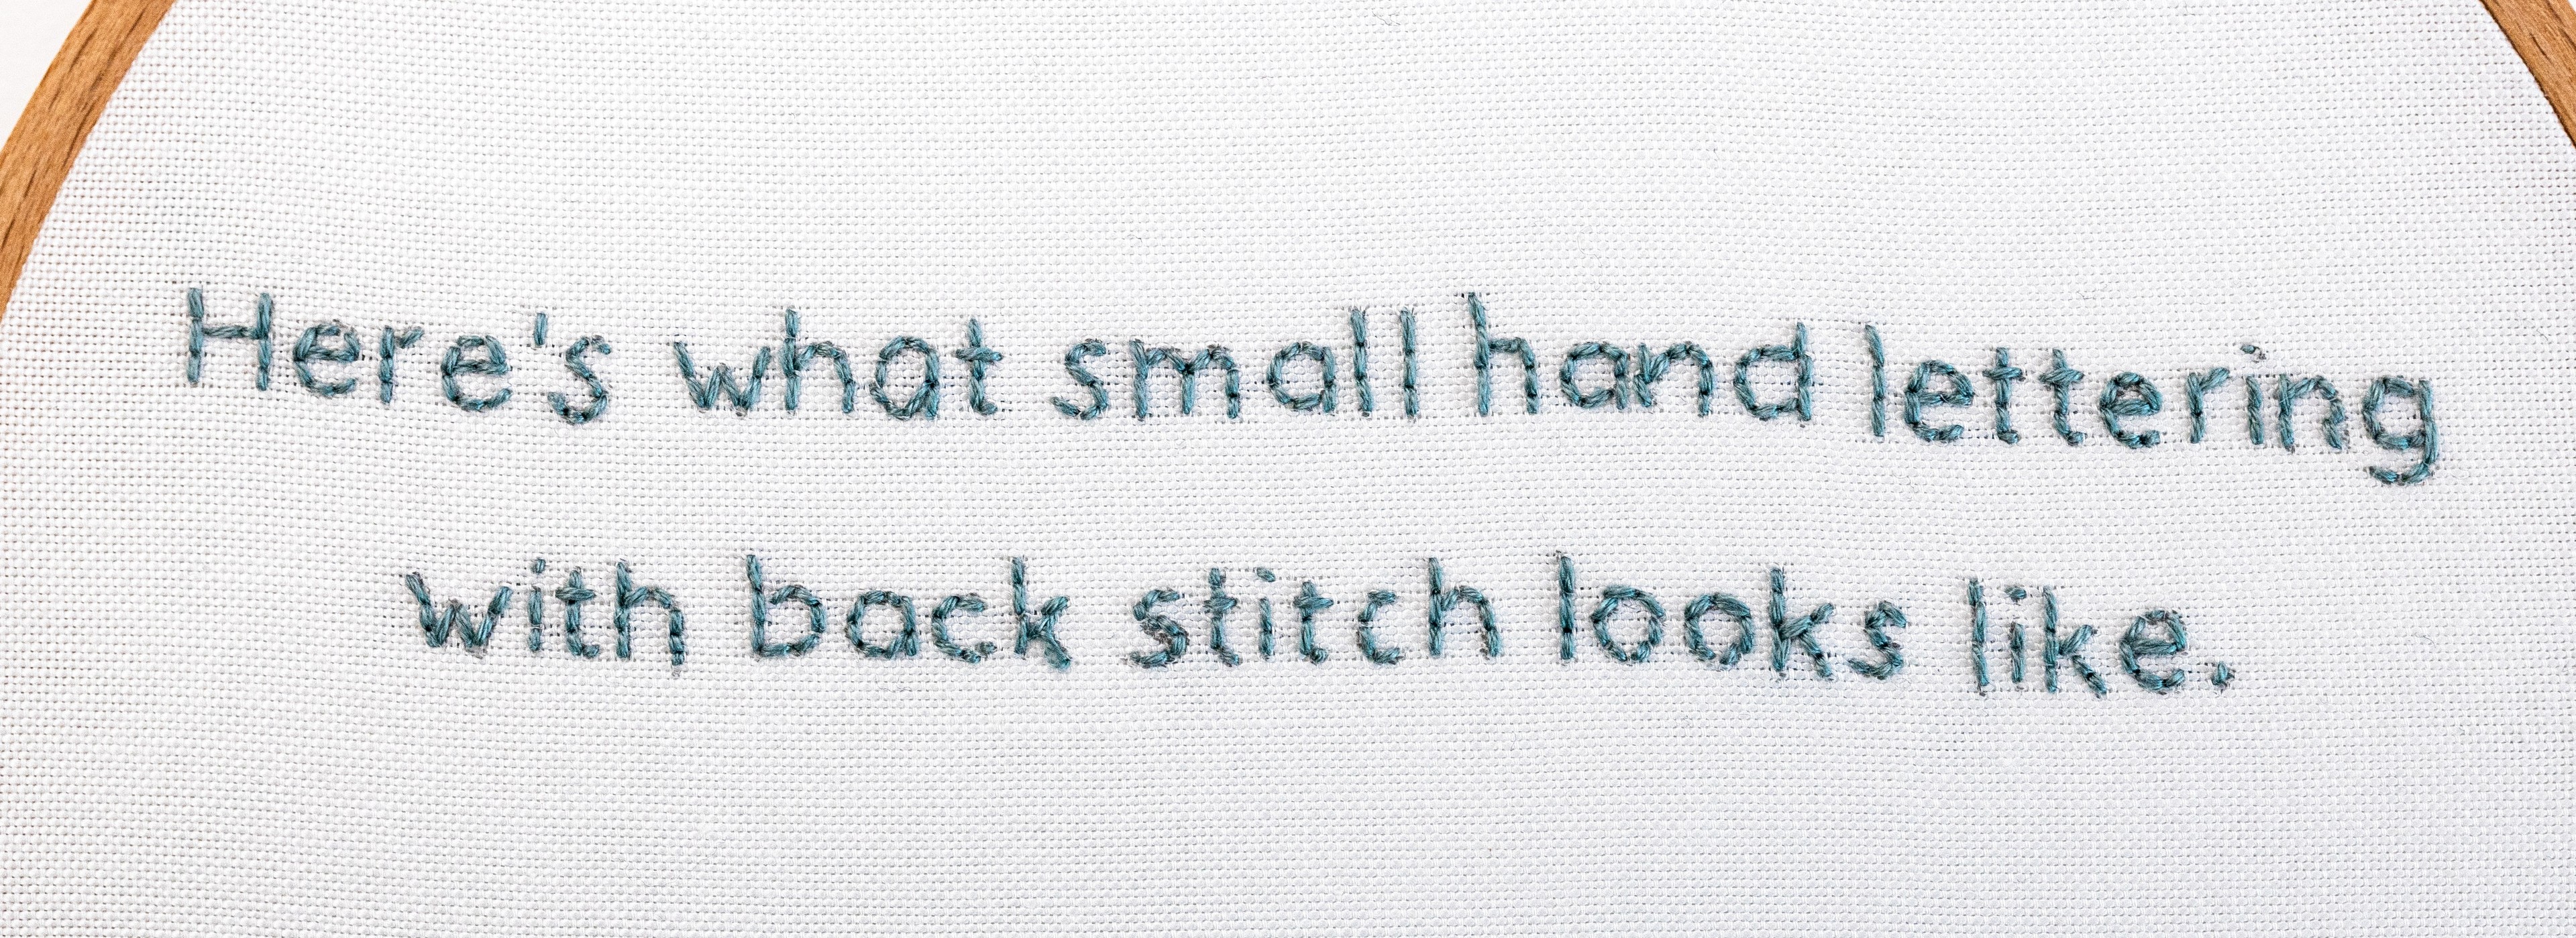 This image is of modern embroidery back stitch.